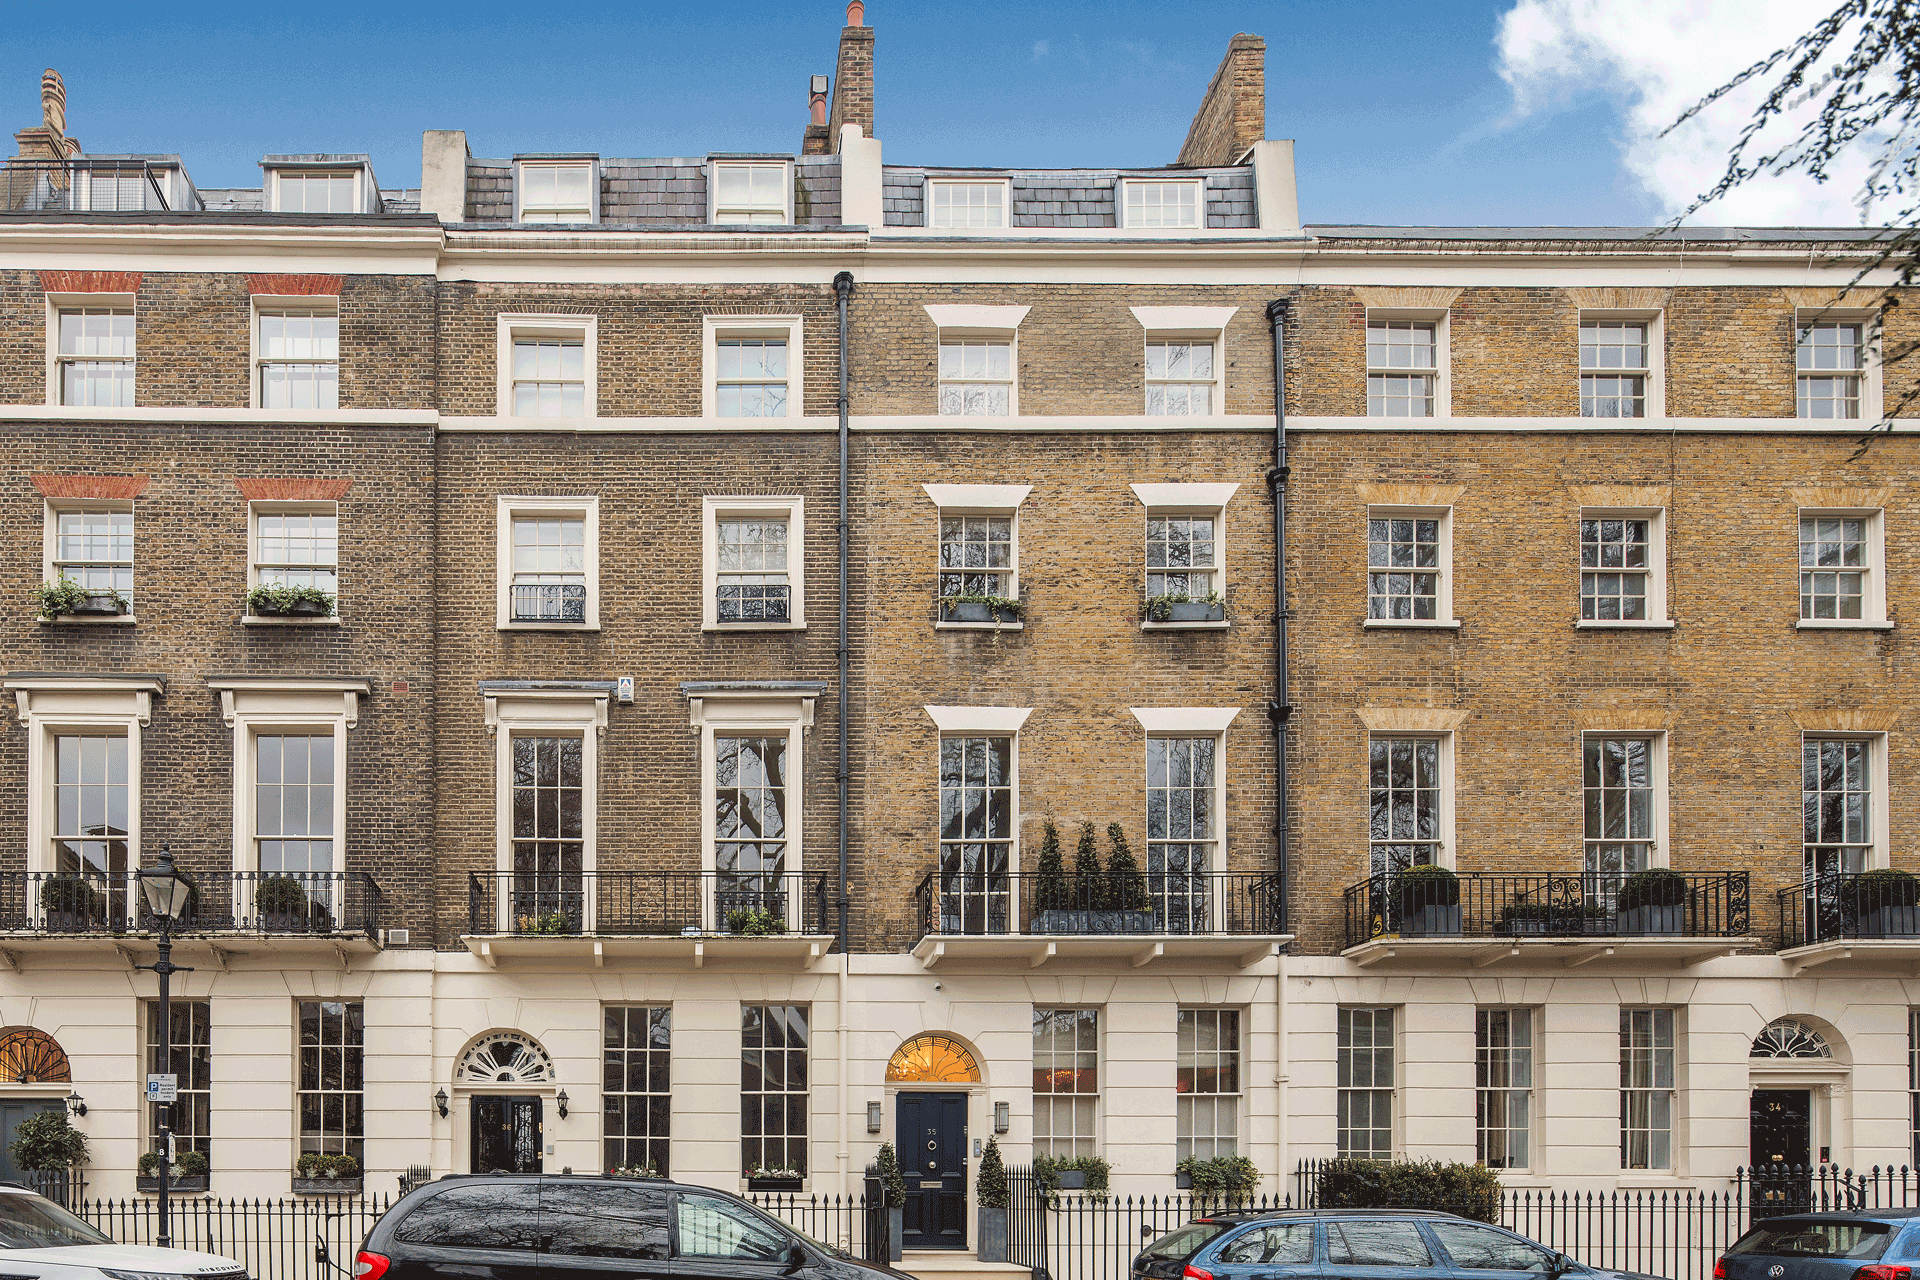 Exterior of a Georgian townhouse in London